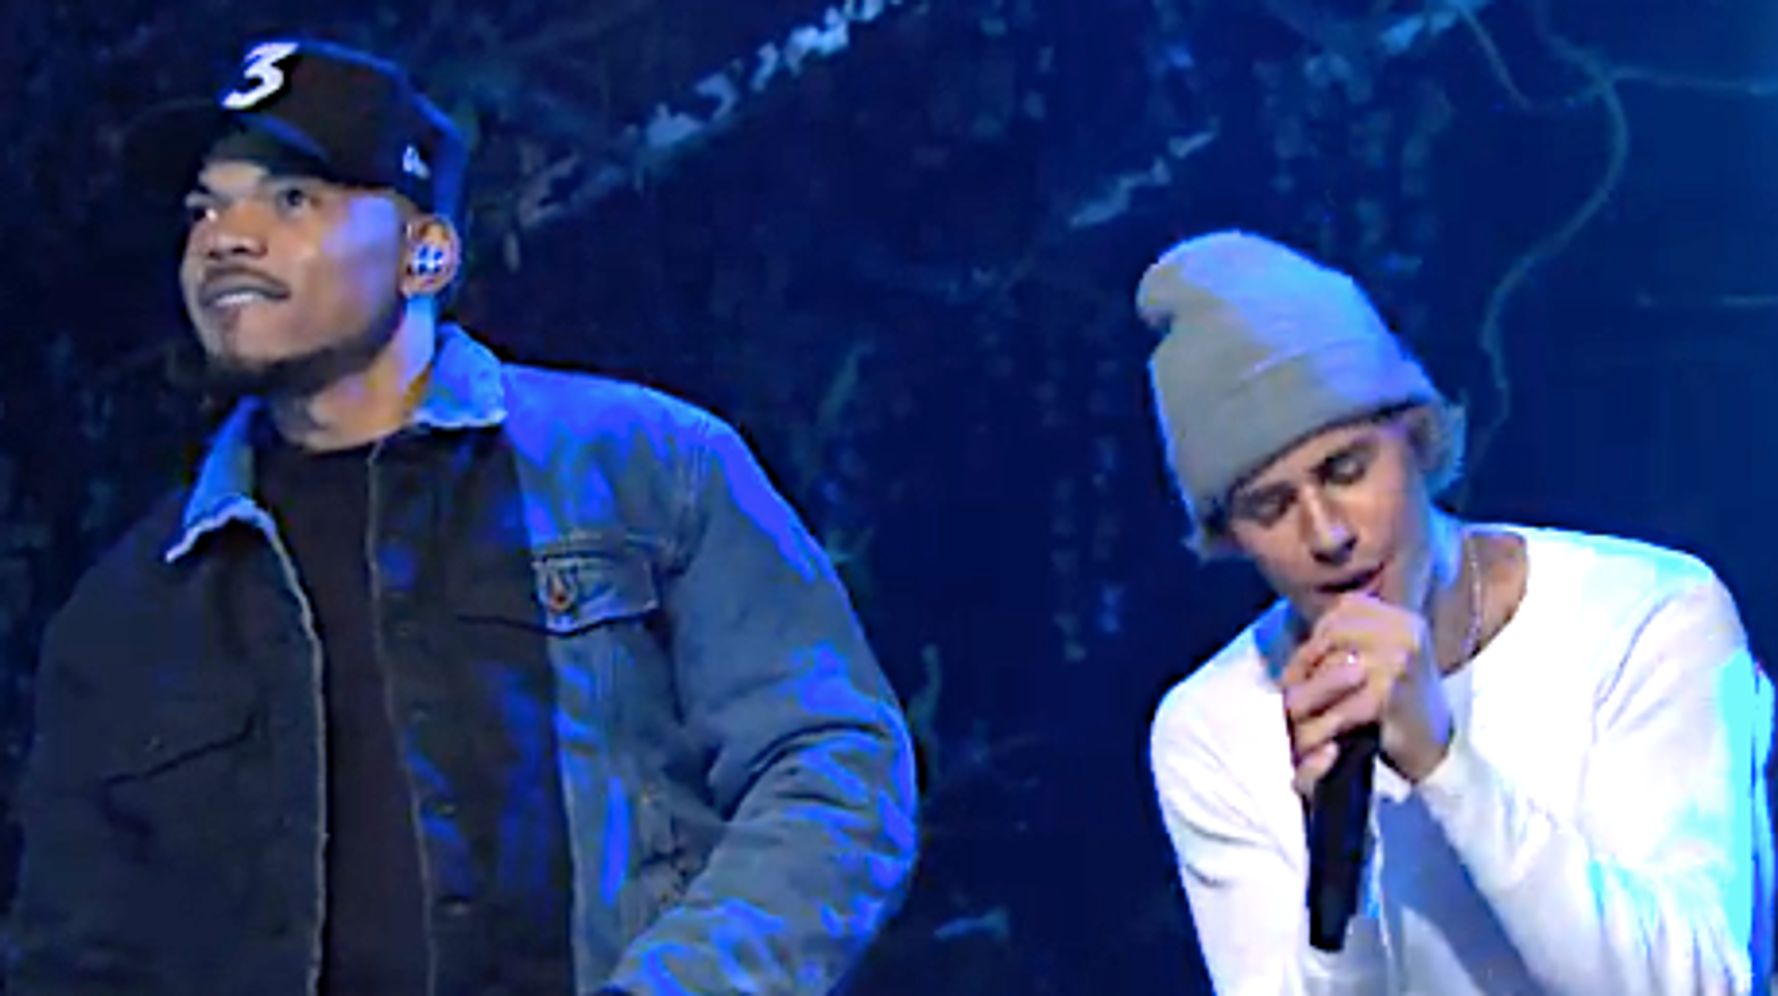 Justin Bieber Bares Pain Of Young Fame In Powerful New Song 'Lonely' On 'SNL'